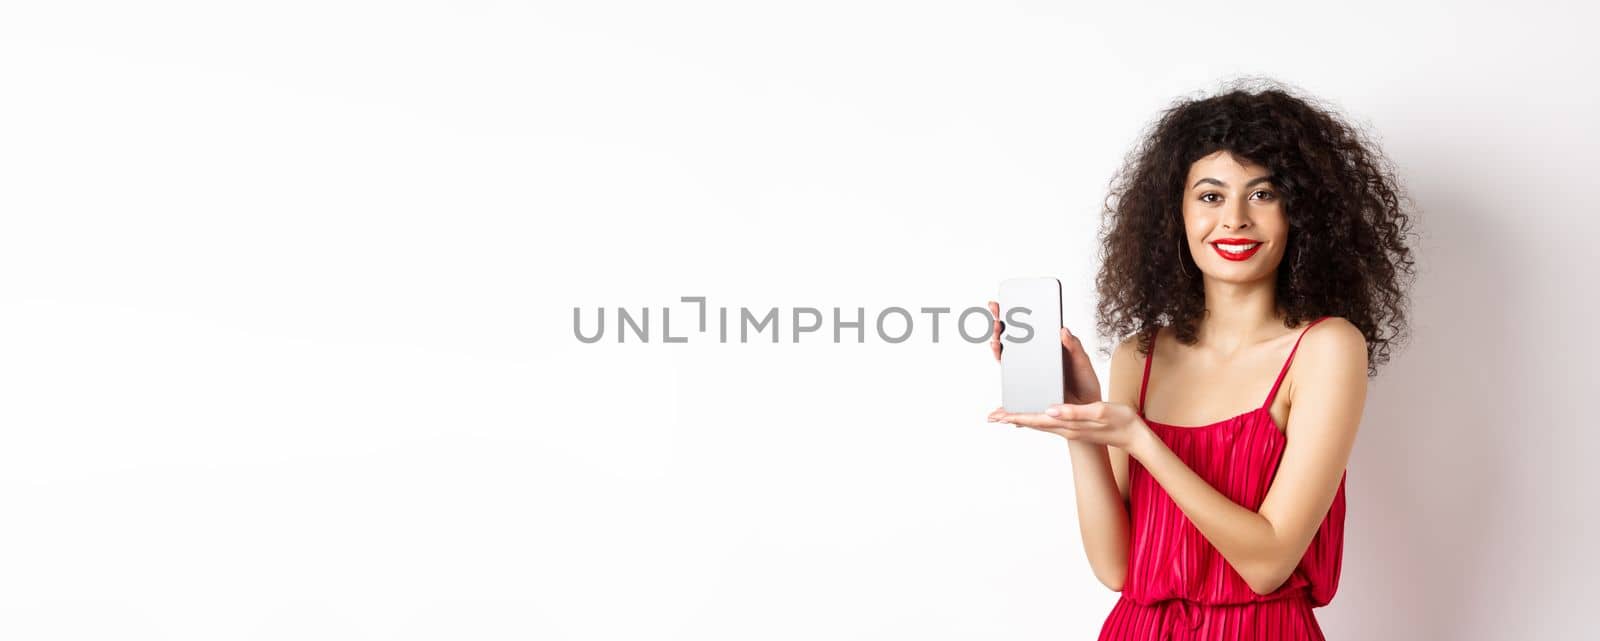 Elegant woman in red dress and makeup, showing blank smartphone screen and smiling, standing over white background by Benzoix